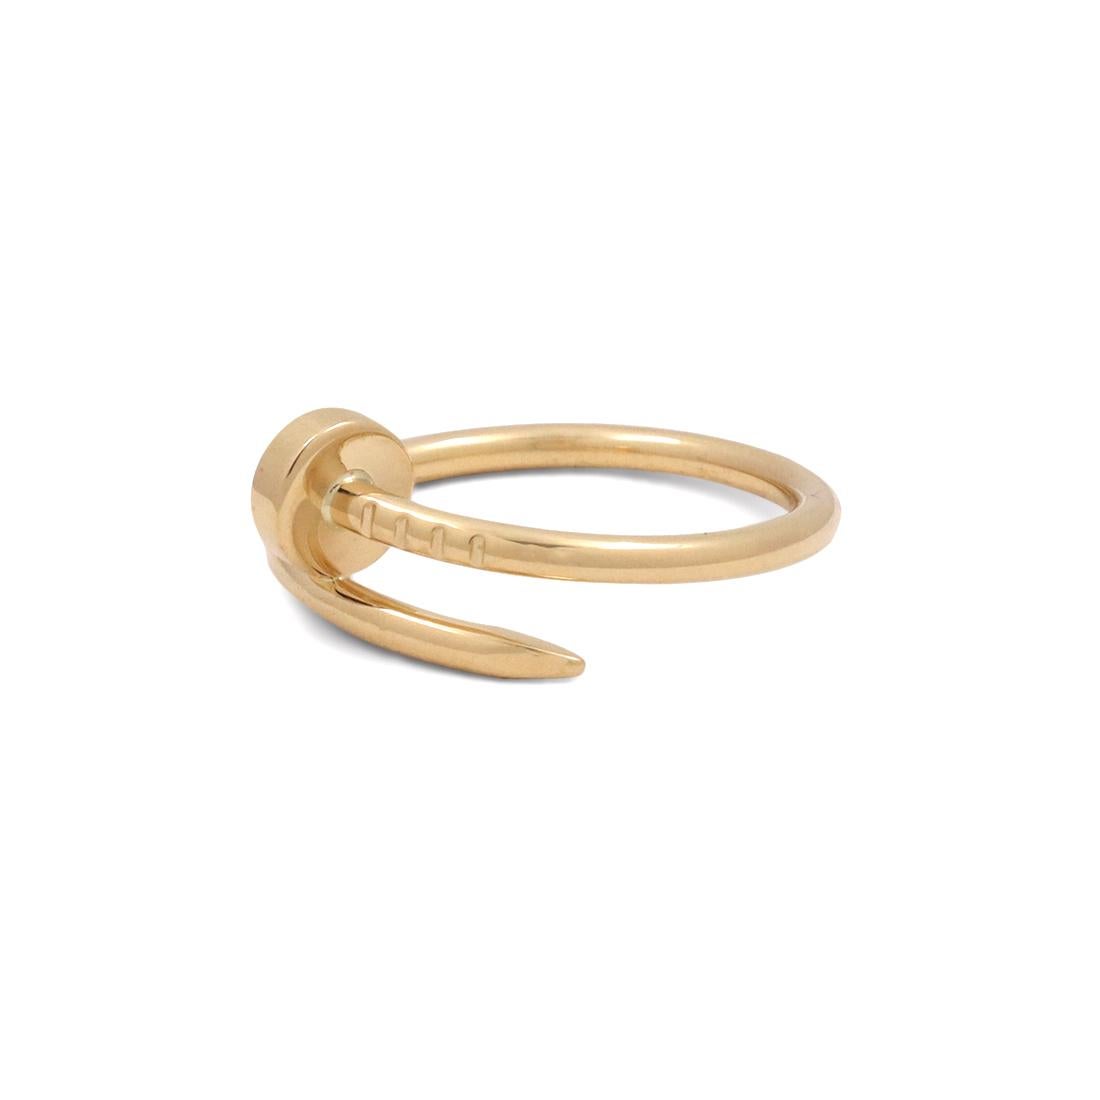 Designed as a 'just a nail', this authentic Cartier 'Juste un Clou' ring is modern, transcending the every day, yet bold. The nail ring is an innovative twist on a familiar and ordinary object. Ring is 1.7mm in width and a size 52 (6 3/4 US). Signed